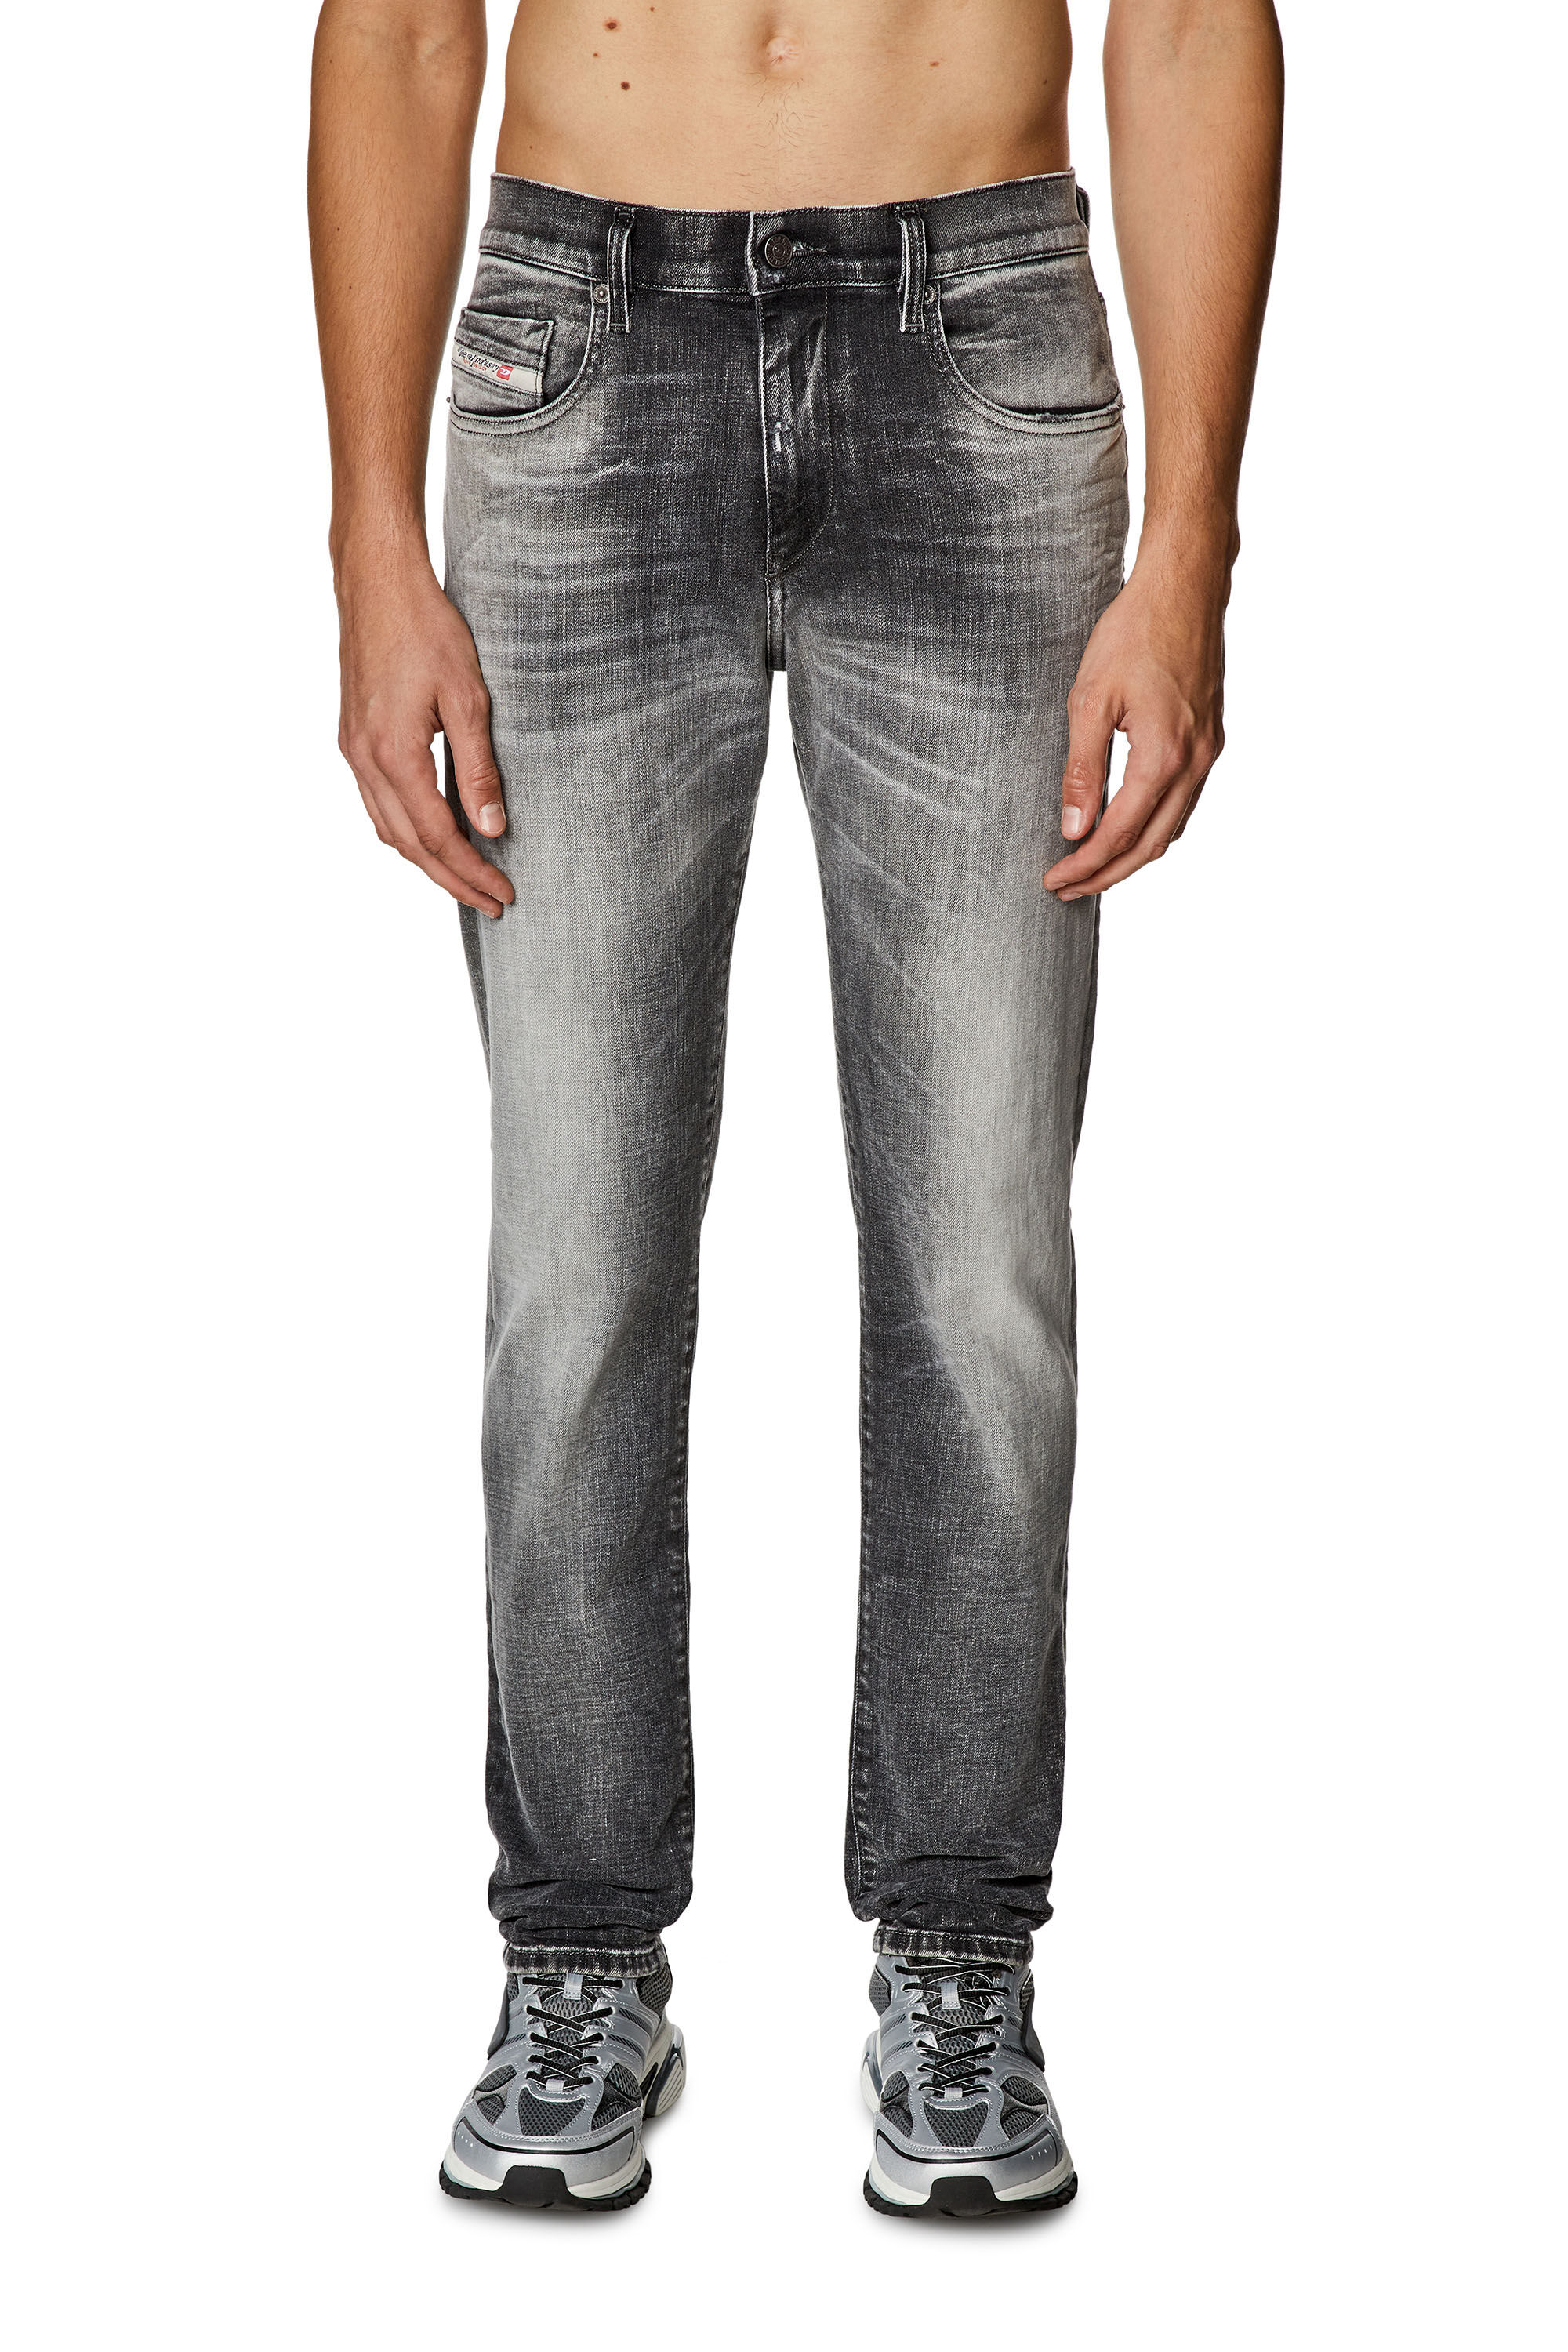 Product Name: RANK 45® Men's Scoreline 4-Way Performance Stretch Slim Fit  Bootcut Jeans